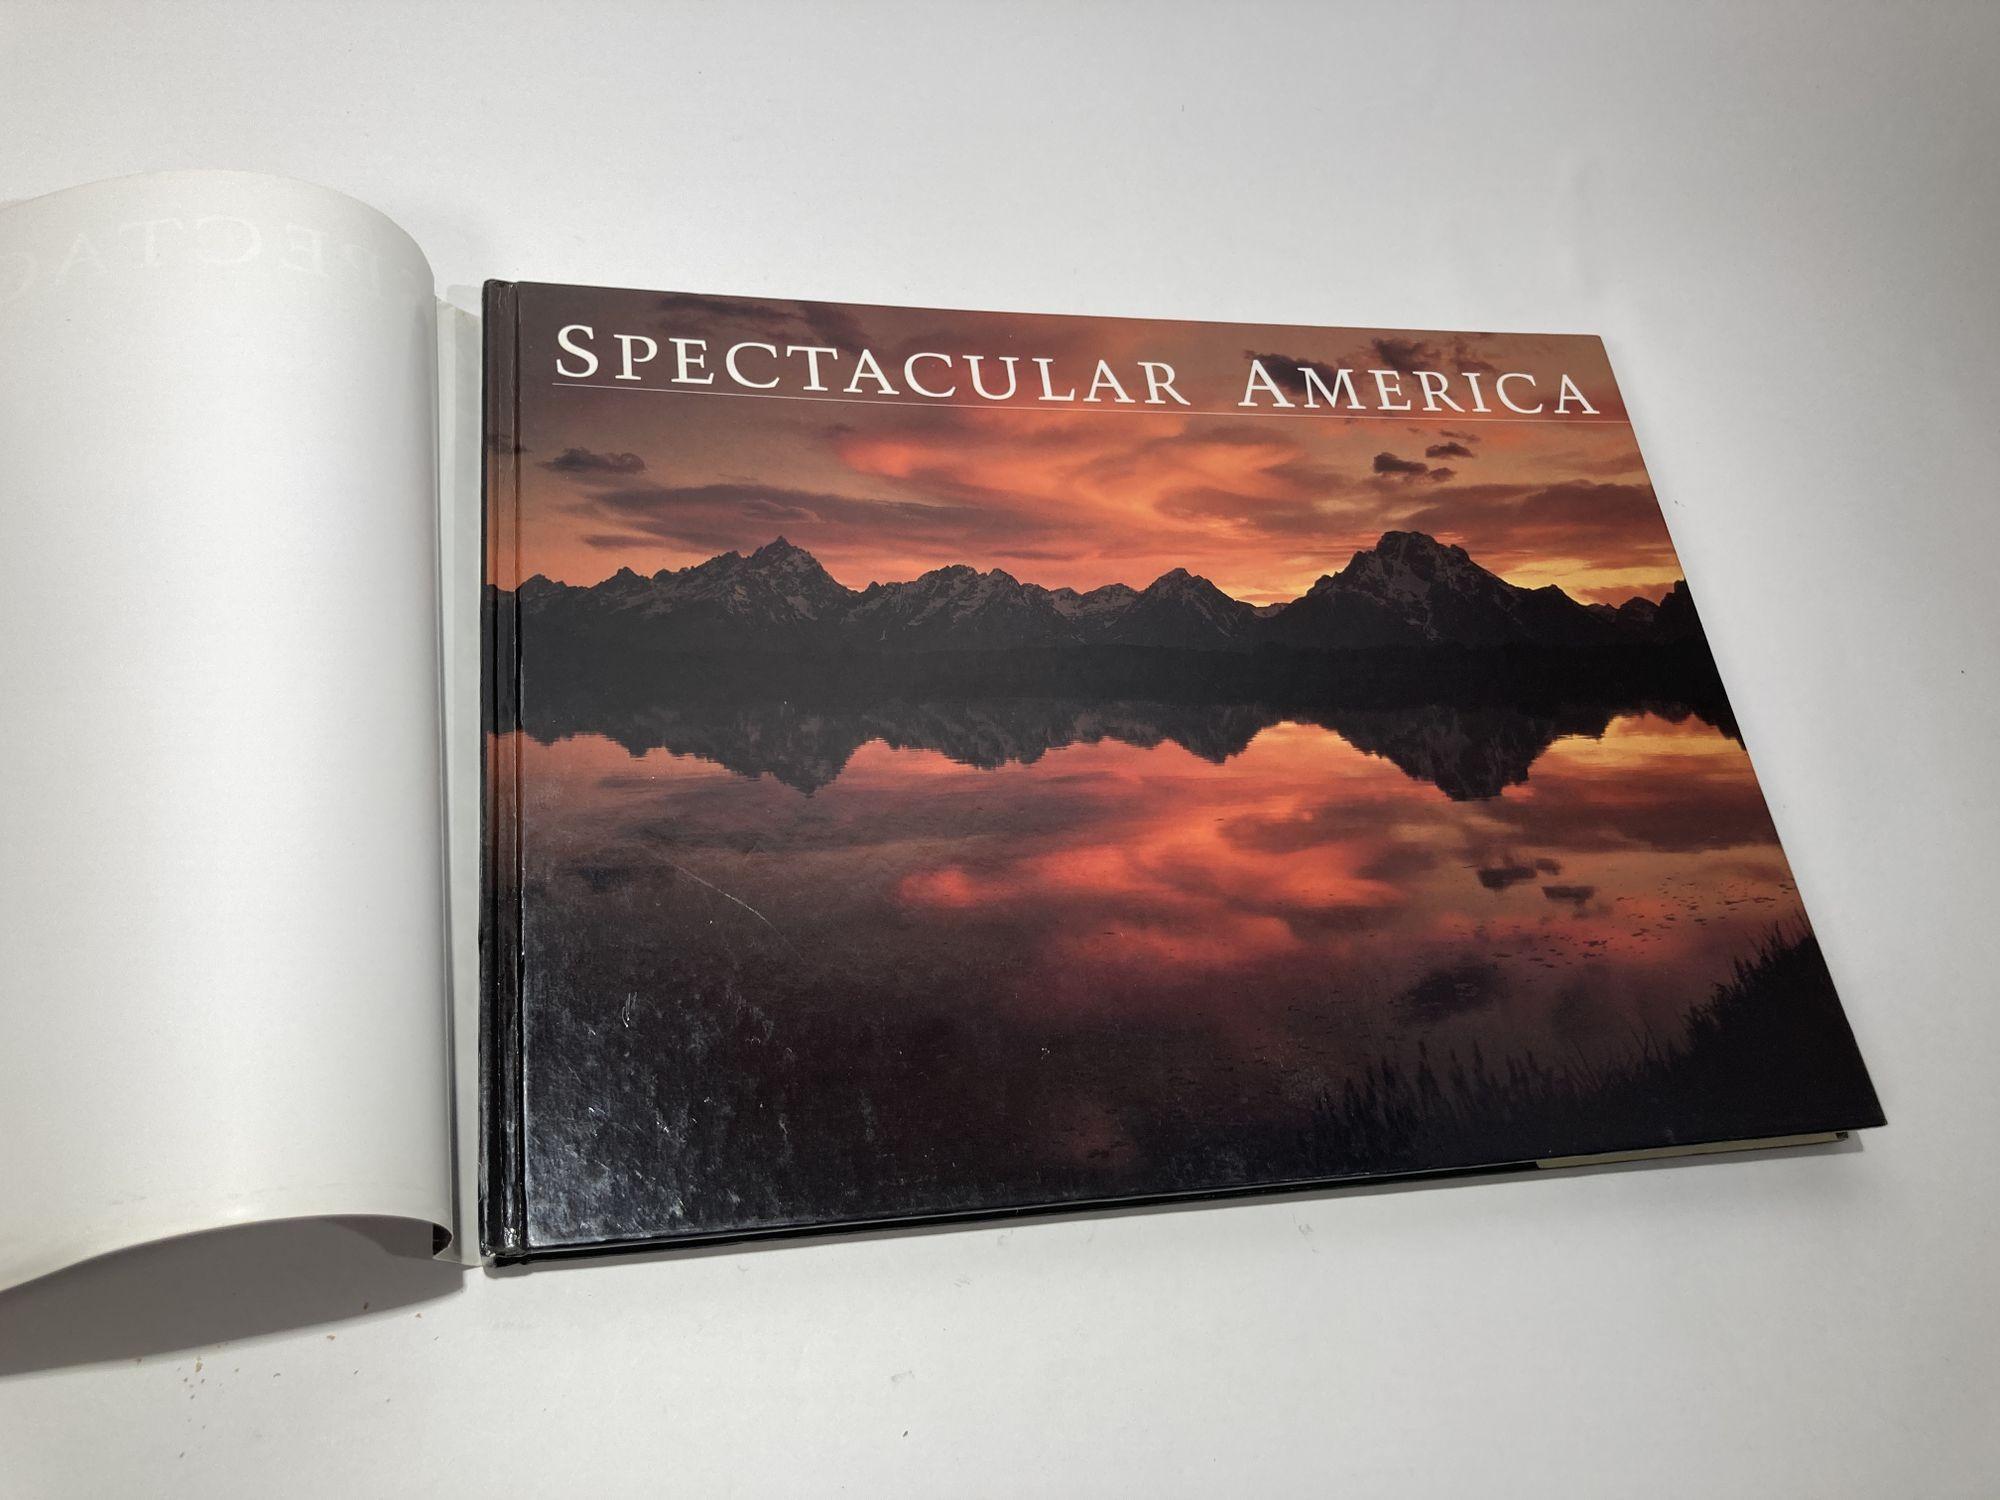 Spectacular America Hardcover Book 1994 In Good Condition For Sale In North Hollywood, CA